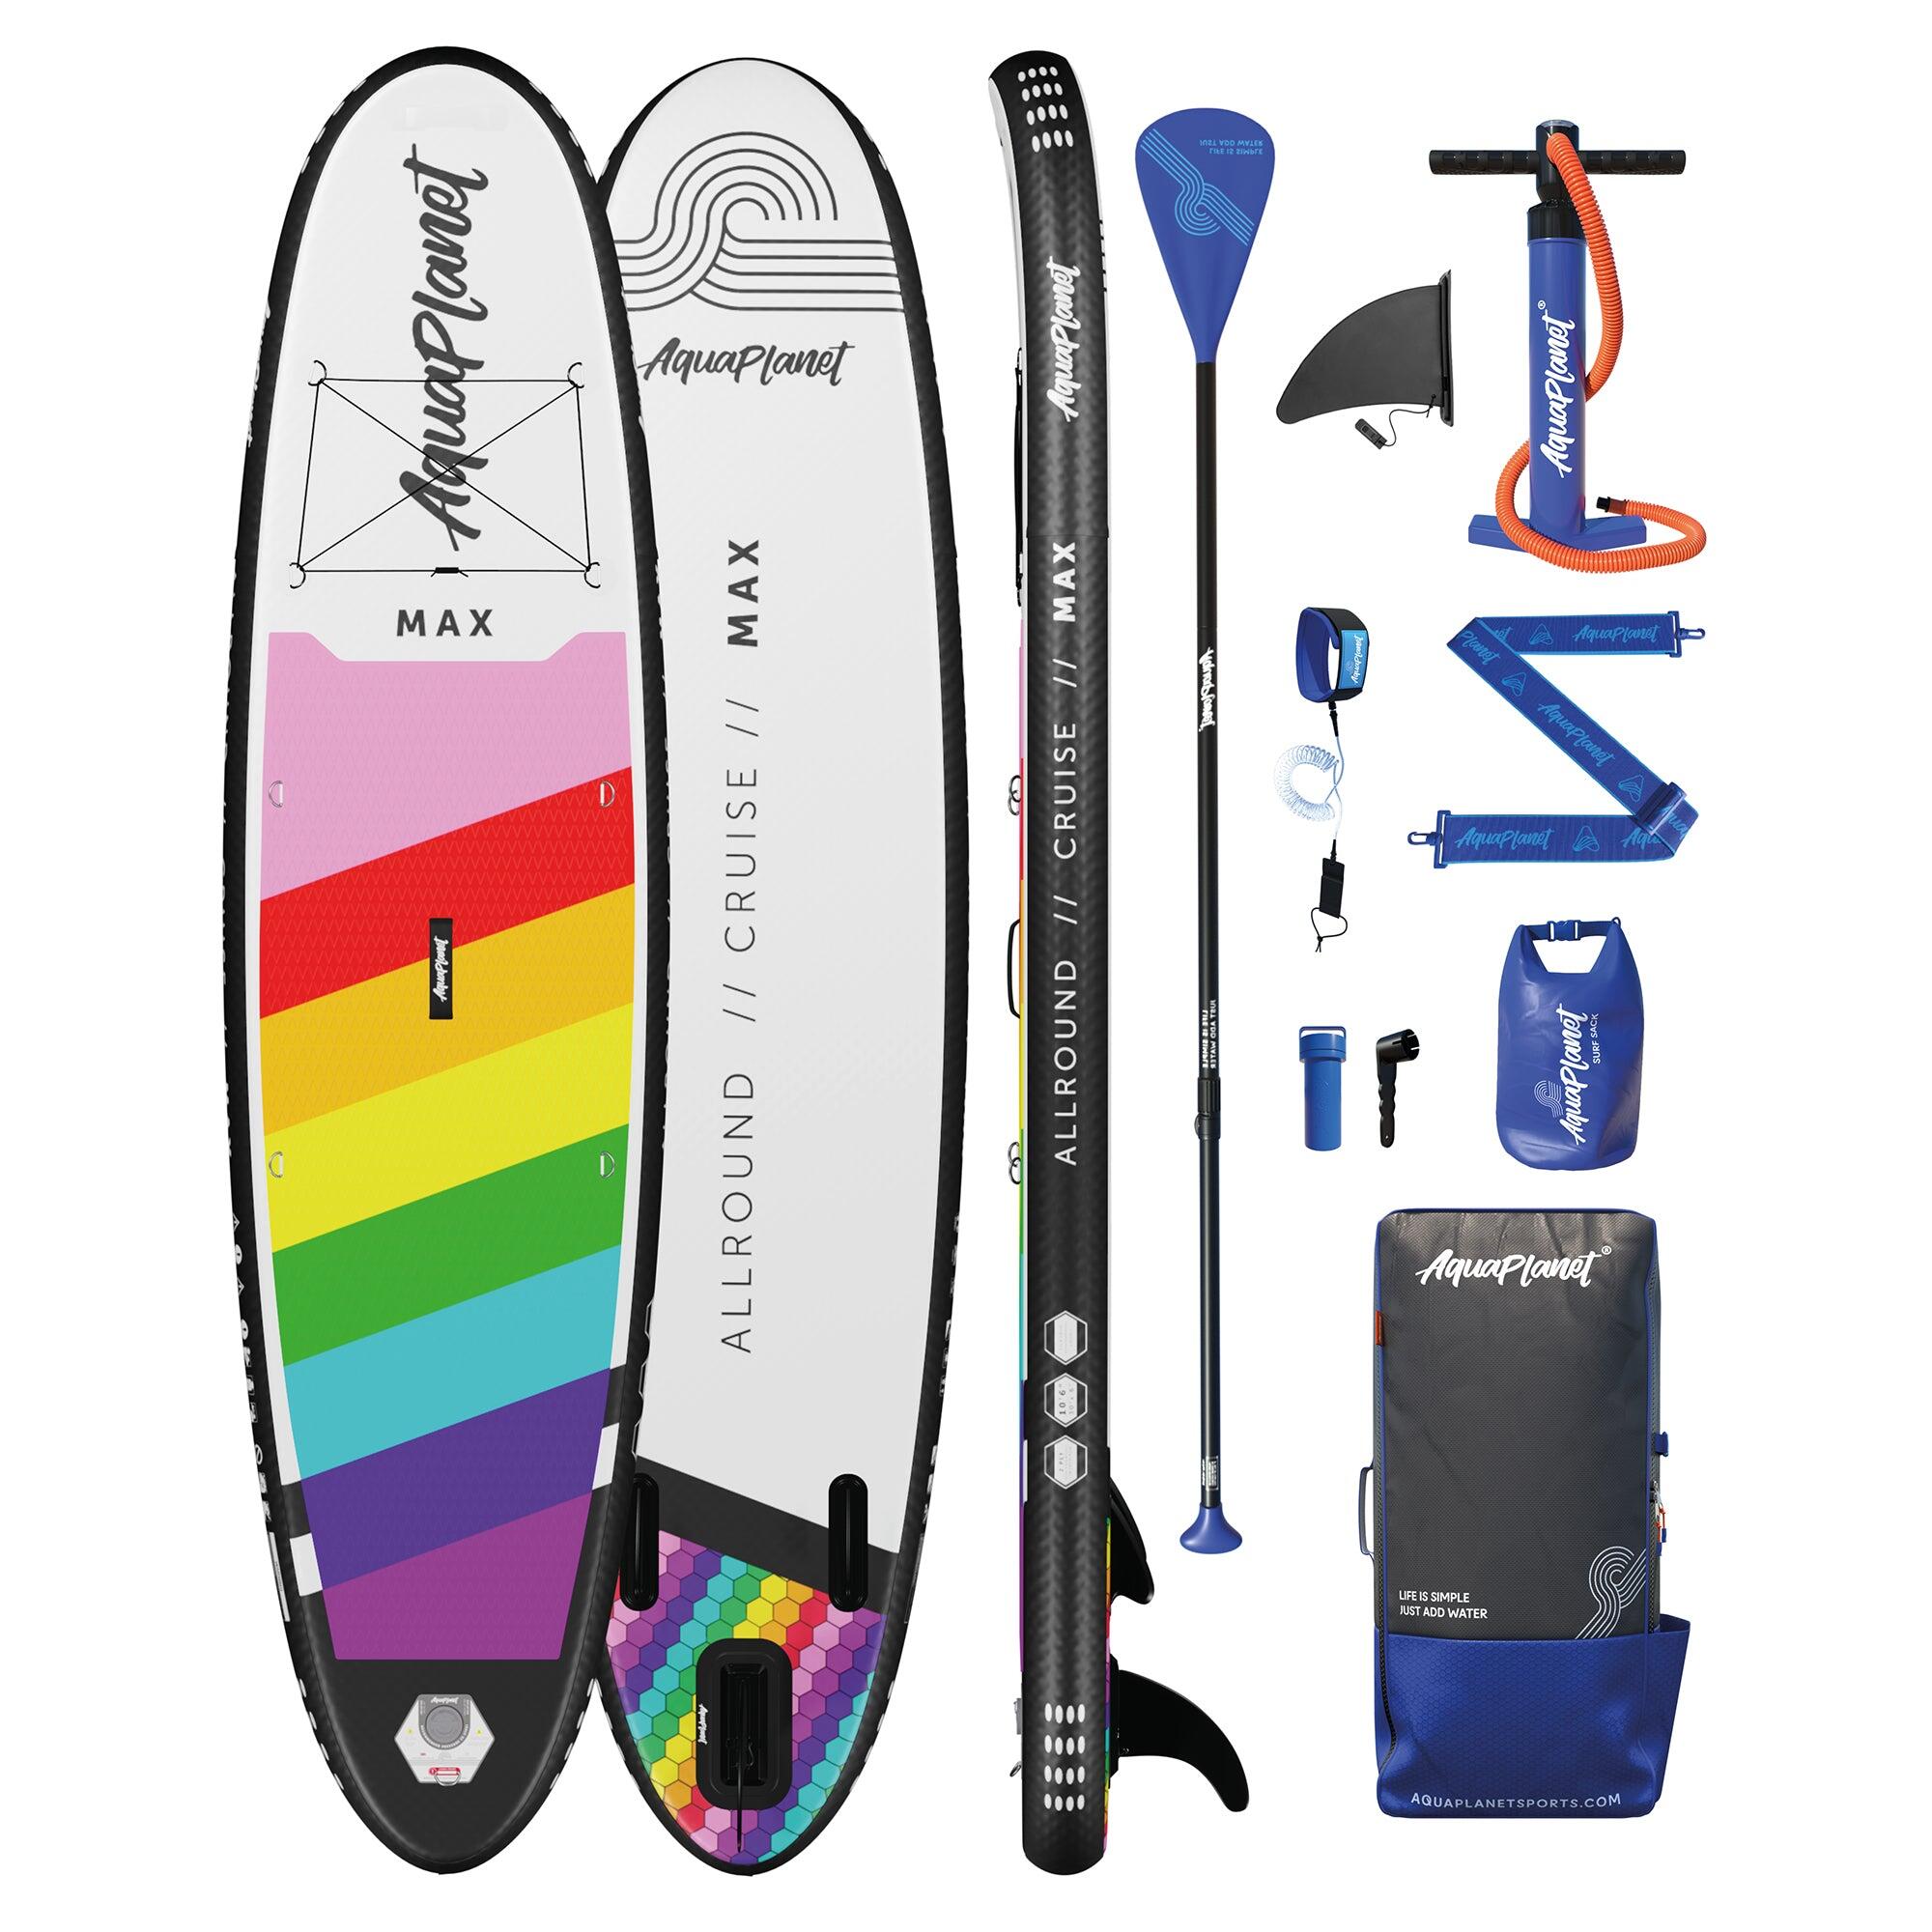 Aquaplanet MAX 10'6 Inflatable Paddle Board Package - Rainbow 1/6